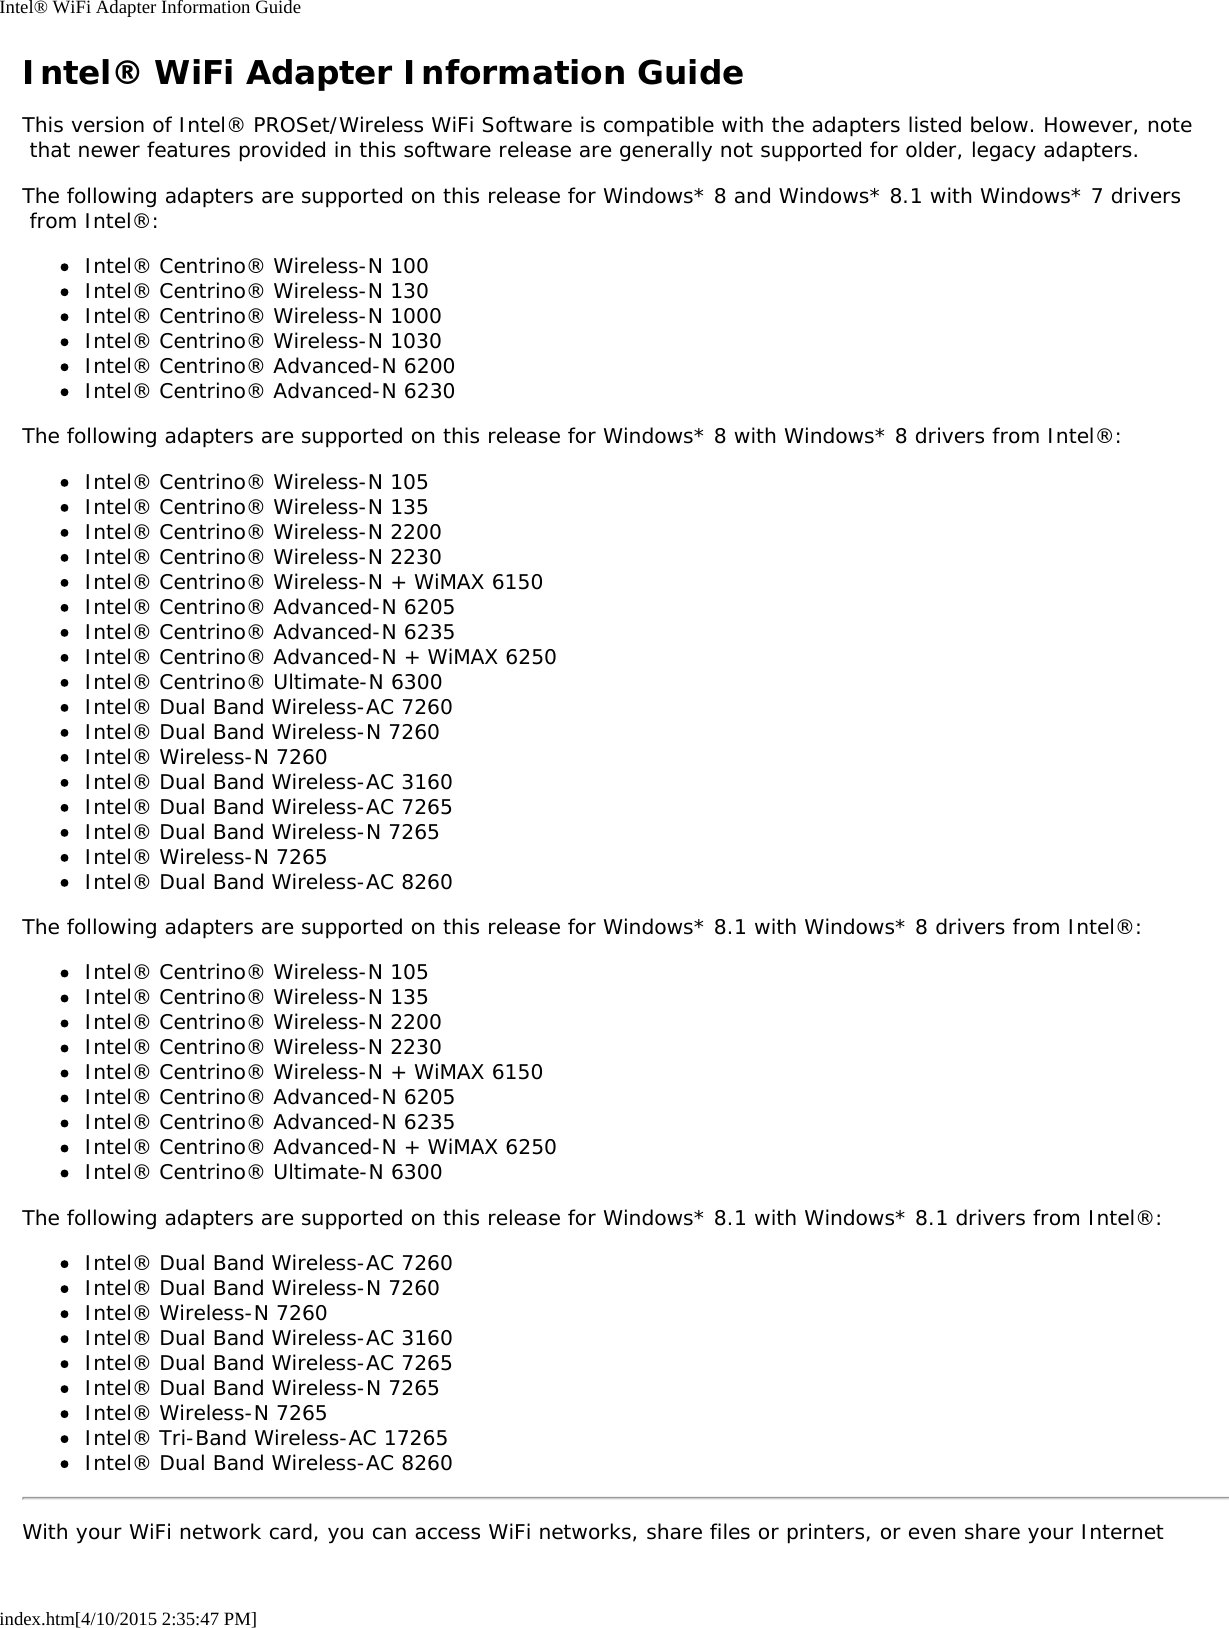 Intel® WiFi Adapter Information Guideindex.htm[4/10/2015 2:35:47 PM]Intel® WiFi Adapter Information GuideThis version of Intel® PROSet/Wireless WiFi Software is compatible with the adapters listed below. However, note that newer features provided in this software release are generally not supported for older, legacy adapters.The following adapters are supported on this release for Windows* 8 and Windows* 8.1 with Windows* 7 drivers from Intel®:Intel® Centrino® Wireless-N 100Intel® Centrino® Wireless-N 130Intel® Centrino® Wireless-N 1000Intel® Centrino® Wireless-N 1030Intel® Centrino® Advanced-N 6200Intel® Centrino® Advanced-N 6230The following adapters are supported on this release for Windows* 8 with Windows* 8 drivers from Intel®:Intel® Centrino® Wireless-N 105Intel® Centrino® Wireless-N 135Intel® Centrino® Wireless-N 2200Intel® Centrino® Wireless-N 2230Intel® Centrino® Wireless-N + WiMAX 6150Intel® Centrino® Advanced-N 6205Intel® Centrino® Advanced-N 6235Intel® Centrino® Advanced-N + WiMAX 6250Intel® Centrino® Ultimate-N 6300Intel® Dual Band Wireless-AC 7260Intel® Dual Band Wireless-N 7260Intel® Wireless-N 7260Intel® Dual Band Wireless-AC 3160Intel® Dual Band Wireless-AC 7265Intel® Dual Band Wireless-N 7265Intel® Wireless-N 7265Intel® Dual Band Wireless-AC 8260The following adapters are supported on this release for Windows* 8.1 with Windows* 8 drivers from Intel®:Intel® Centrino® Wireless-N 105Intel® Centrino® Wireless-N 135Intel® Centrino® Wireless-N 2200Intel® Centrino® Wireless-N 2230Intel® Centrino® Wireless-N + WiMAX 6150Intel® Centrino® Advanced-N 6205Intel® Centrino® Advanced-N 6235Intel® Centrino® Advanced-N + WiMAX 6250Intel® Centrino® Ultimate-N 6300The following adapters are supported on this release for Windows* 8.1 with Windows* 8.1 drivers from Intel®:Intel® Dual Band Wireless-AC 7260Intel® Dual Band Wireless-N 7260Intel® Wireless-N 7260Intel® Dual Band Wireless-AC 3160Intel® Dual Band Wireless-AC 7265Intel® Dual Band Wireless-N 7265Intel® Wireless-N 7265Intel® Tri-Band Wireless-AC 17265Intel® Dual Band Wireless-AC 8260With your WiFi network card, you can access WiFi networks, share files or printers, or even share your Internet